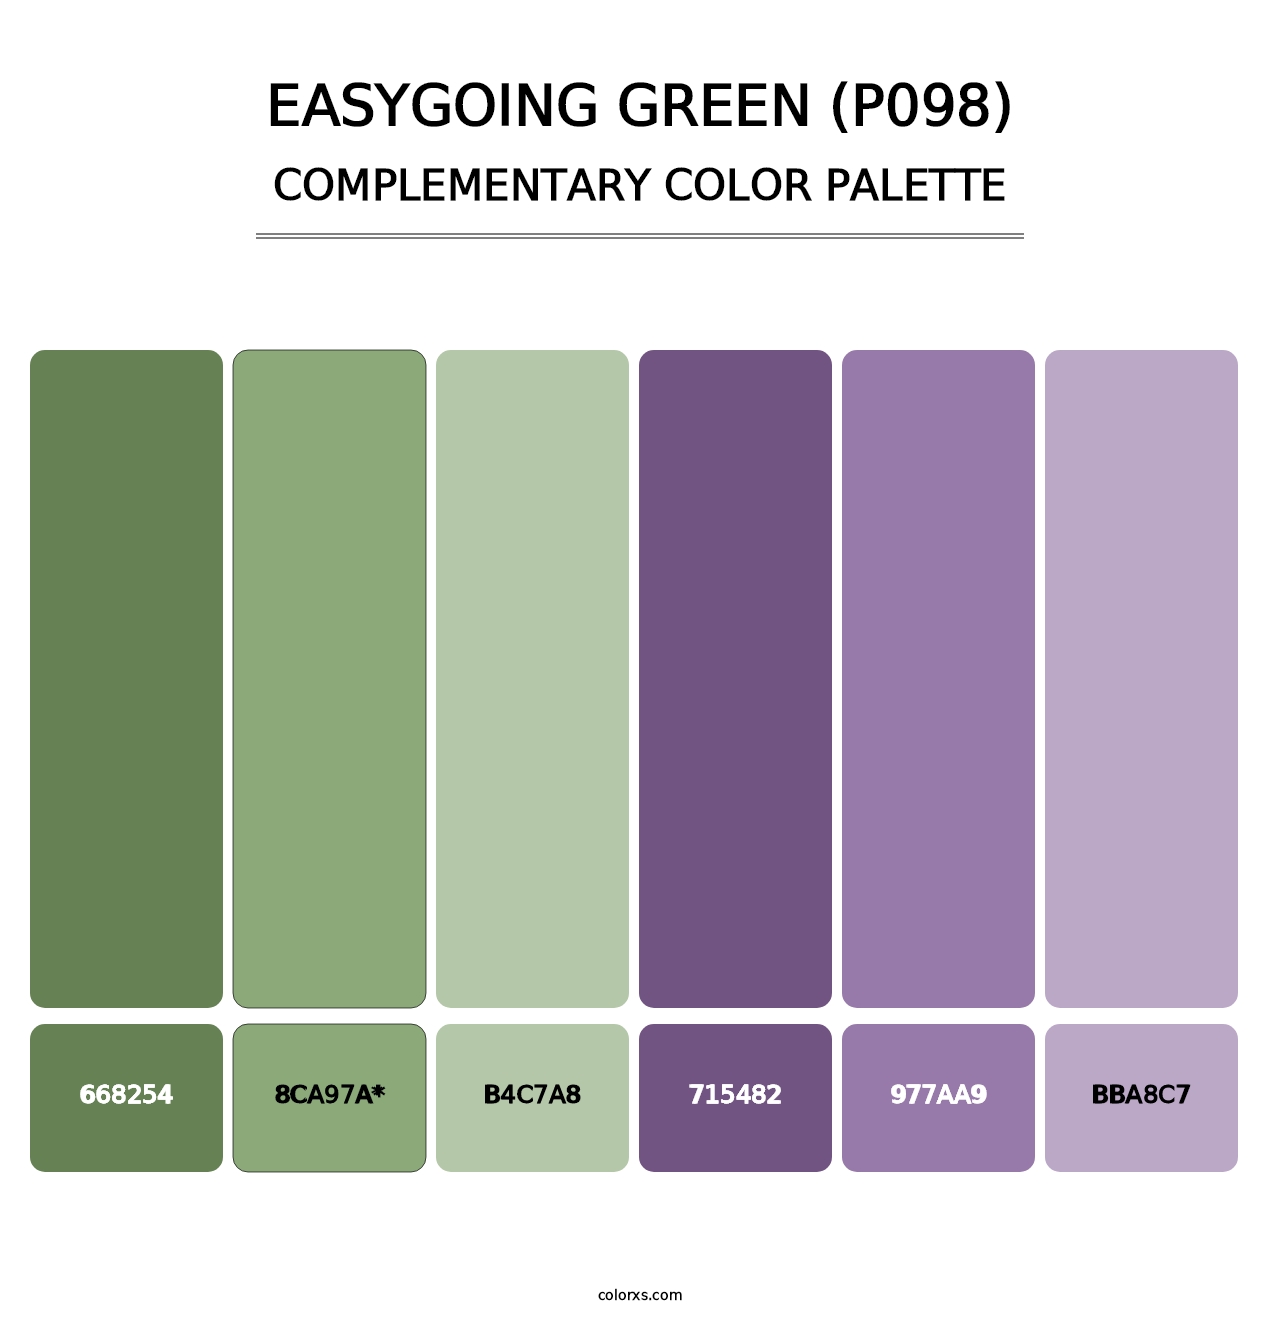 Easygoing Green (P098) - Complementary Color Palette